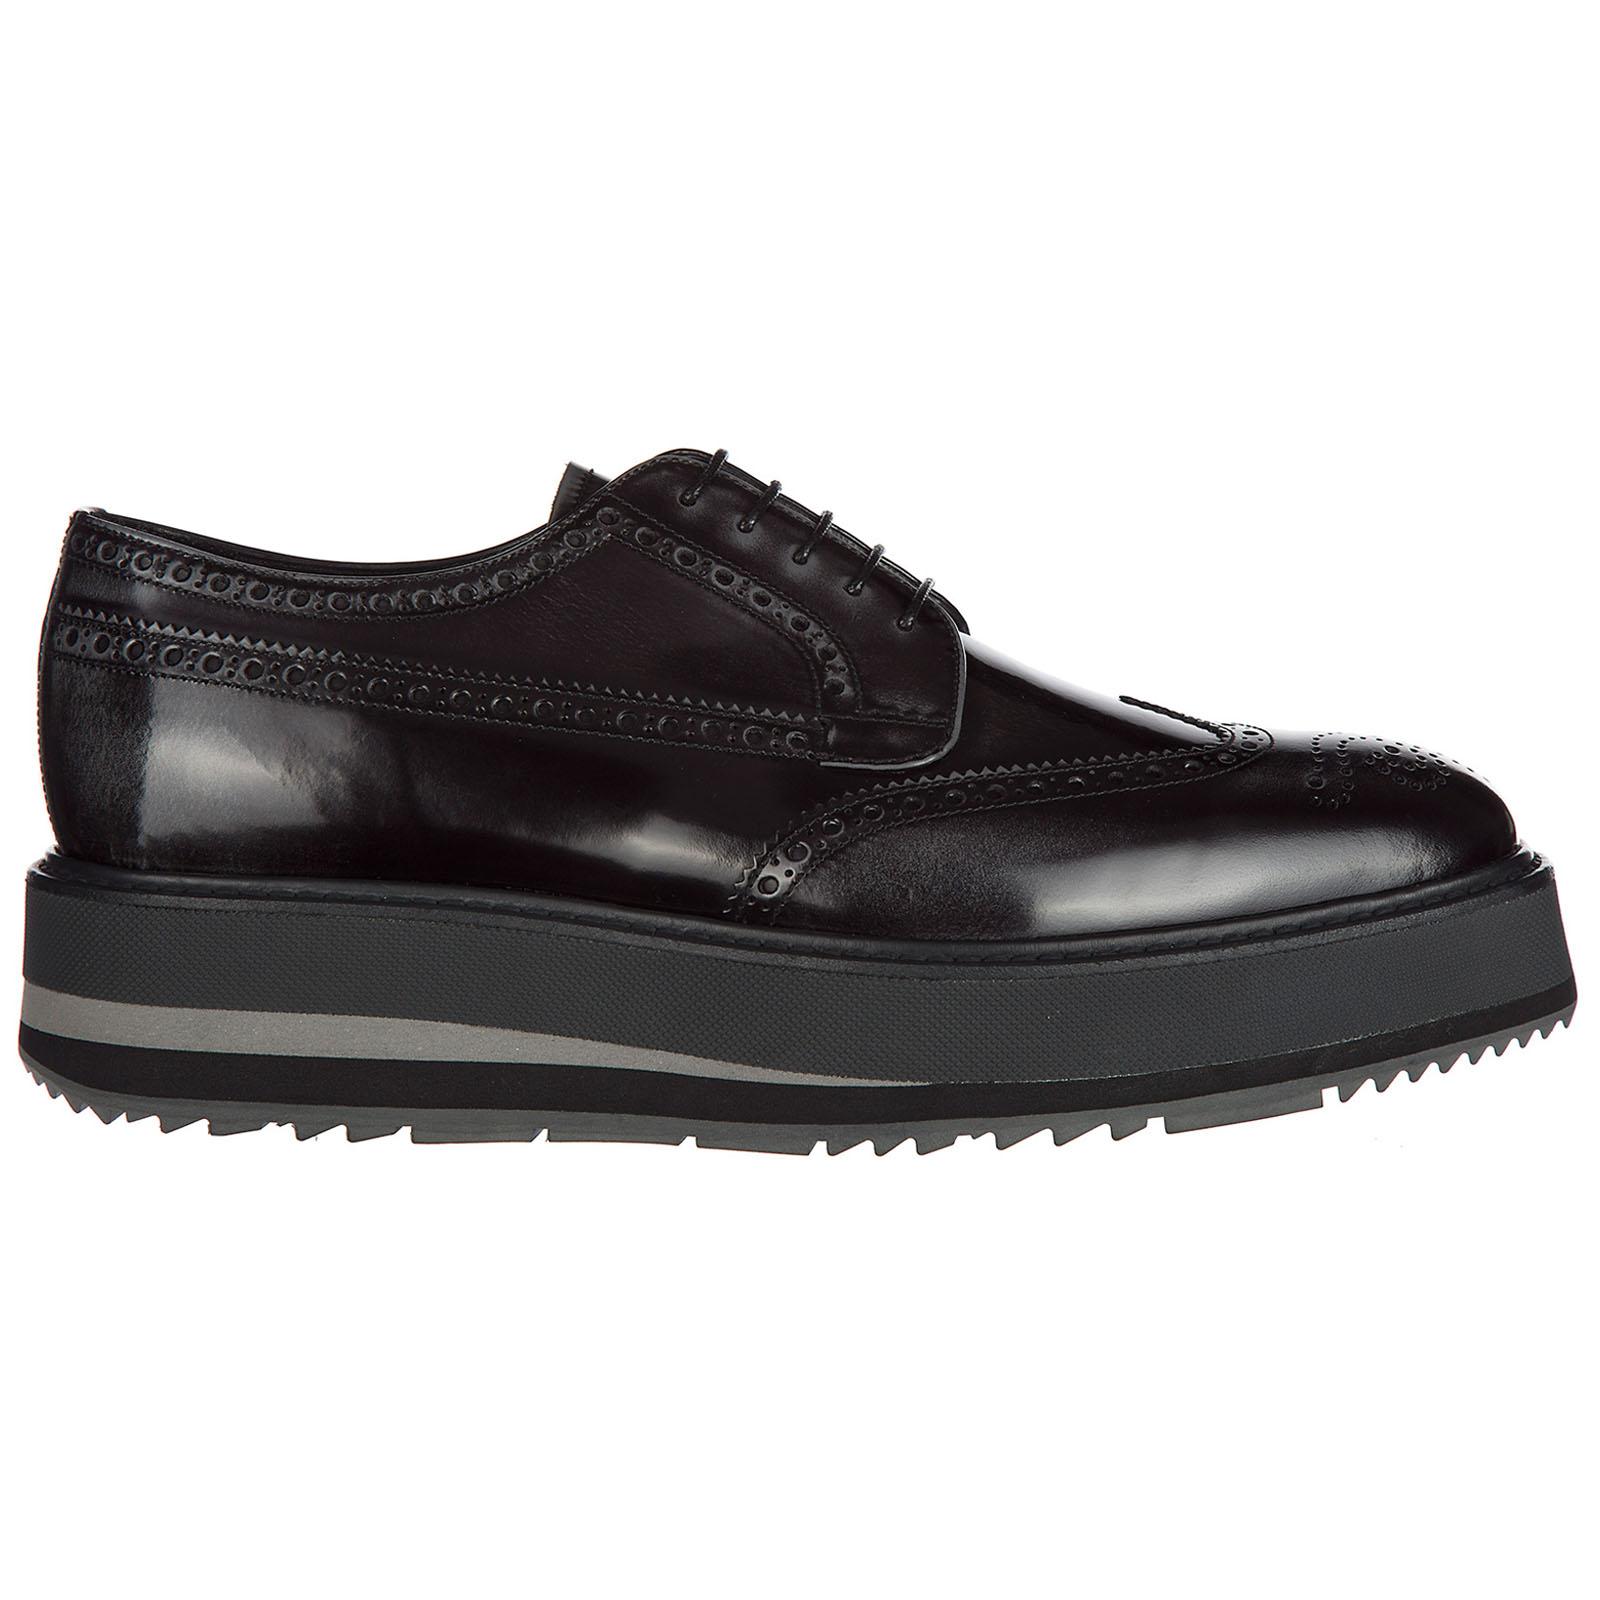 Prada Men's Classic Leather Lace Up Laced Formal Shoes Derby in Black ...